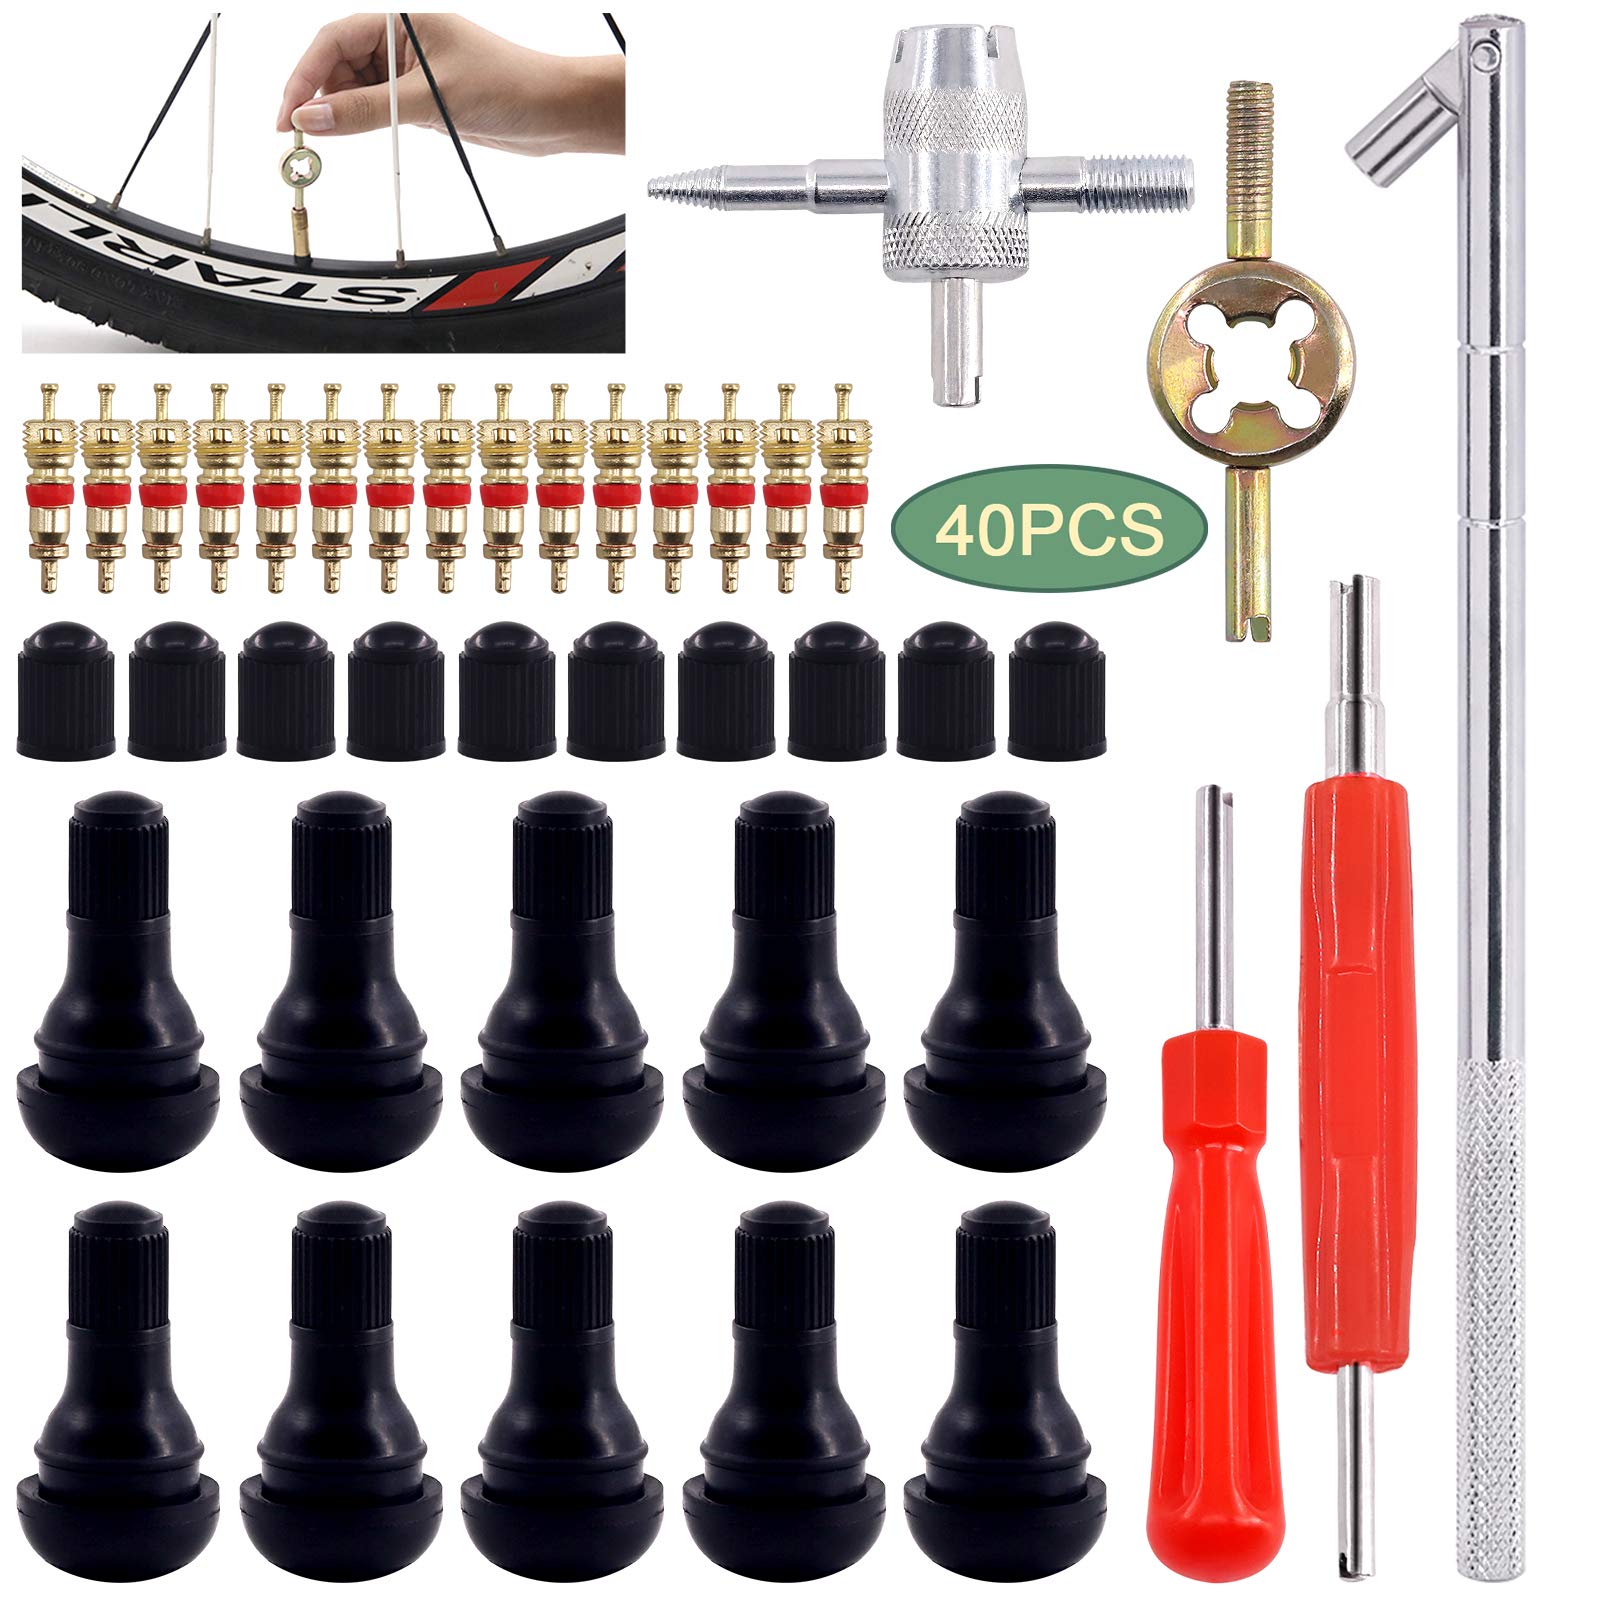 Keadic 40Pcs Tire Valve Core Removal Repair Tools Set, Includes TR412 Snap-in Valve Stems & Caps with Valve Stem Cores, 4 Way Valve Core Remover Installer Tool & Dual Single Head Valve Core Remover von Keadic